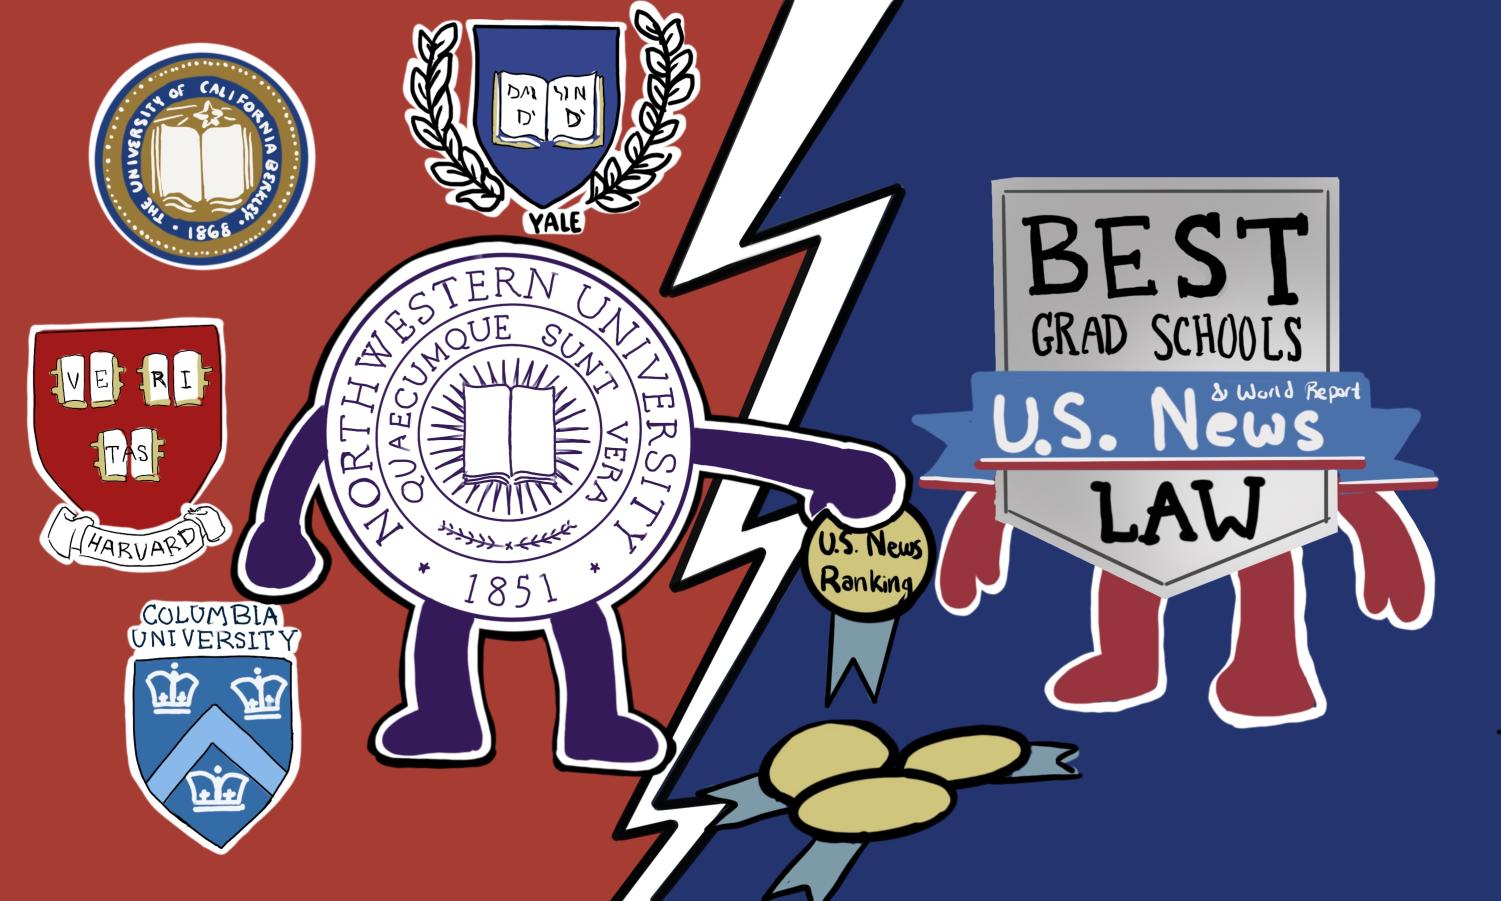 Northwestern%E2%80%99s+logo+is+displayed+on+a+red+background+with+other+schools+like+Harvard%2C+Yale%2C+Georgetown+and+Stanford.+On+the+other+side%2C+U.S.+News+and+World+Report%E2%80%99s+logo+is+displayed+on+a+blue+logo%2C+with+a+hand+extending+out+of+Northwestern%E2%80%99s+logo+dropping+a+medal+on+the+floor.